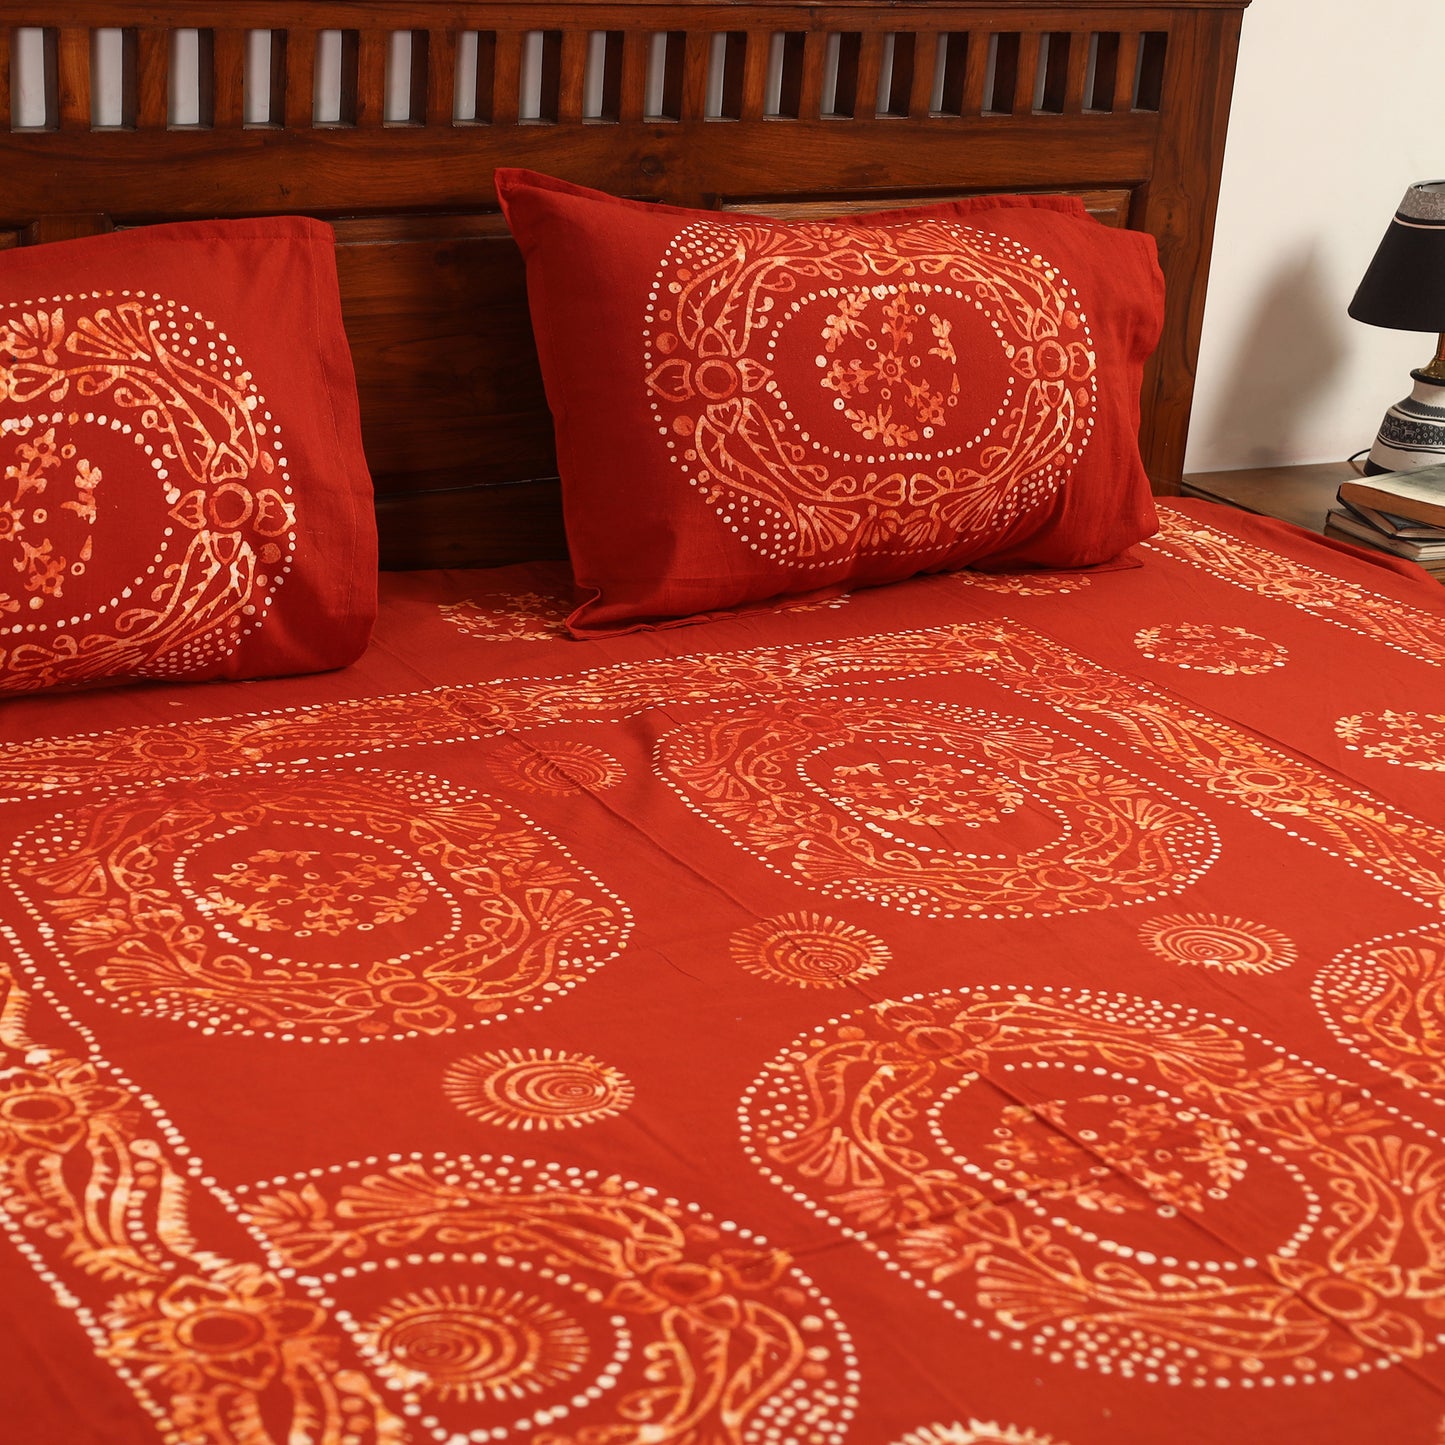 Red - Hand Batik Printed Cotton Double Bed Cover with Pillow Covers (108 x 90 in) 13